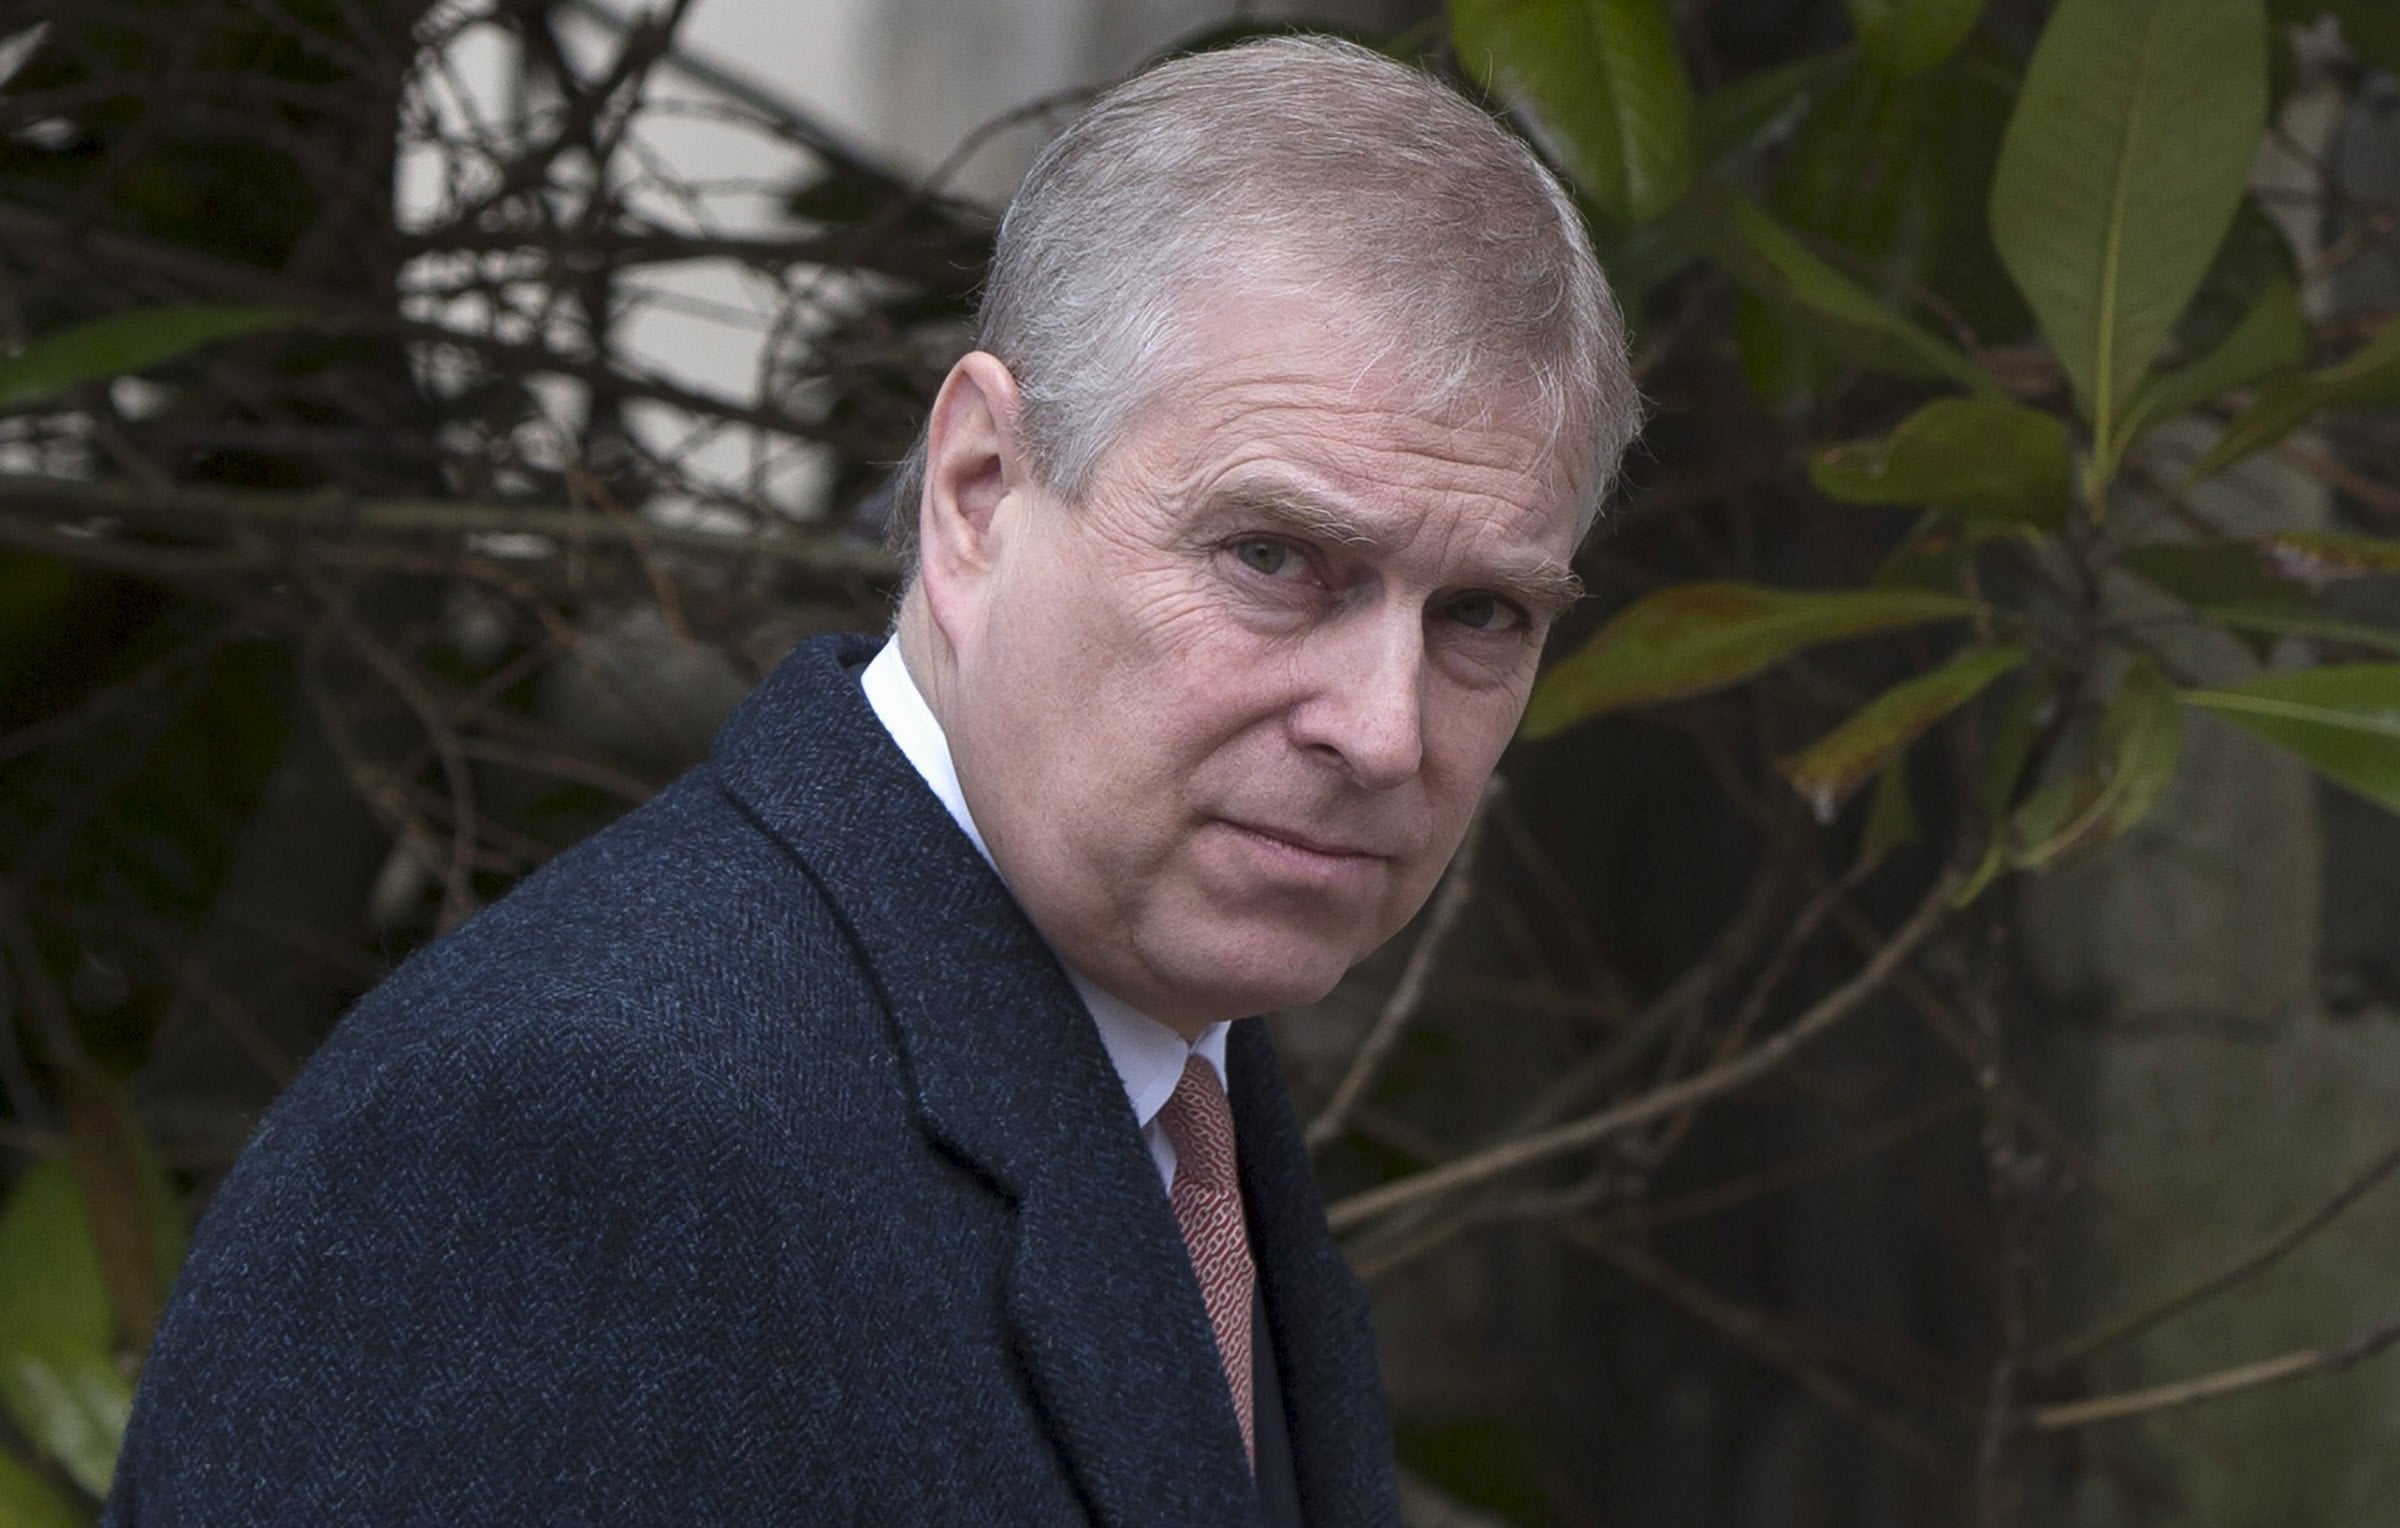 The Duke of York would lose his temper if 50 to 60 stuffed toys were not position on his bed properly, an ITV documentary will allege (PA)